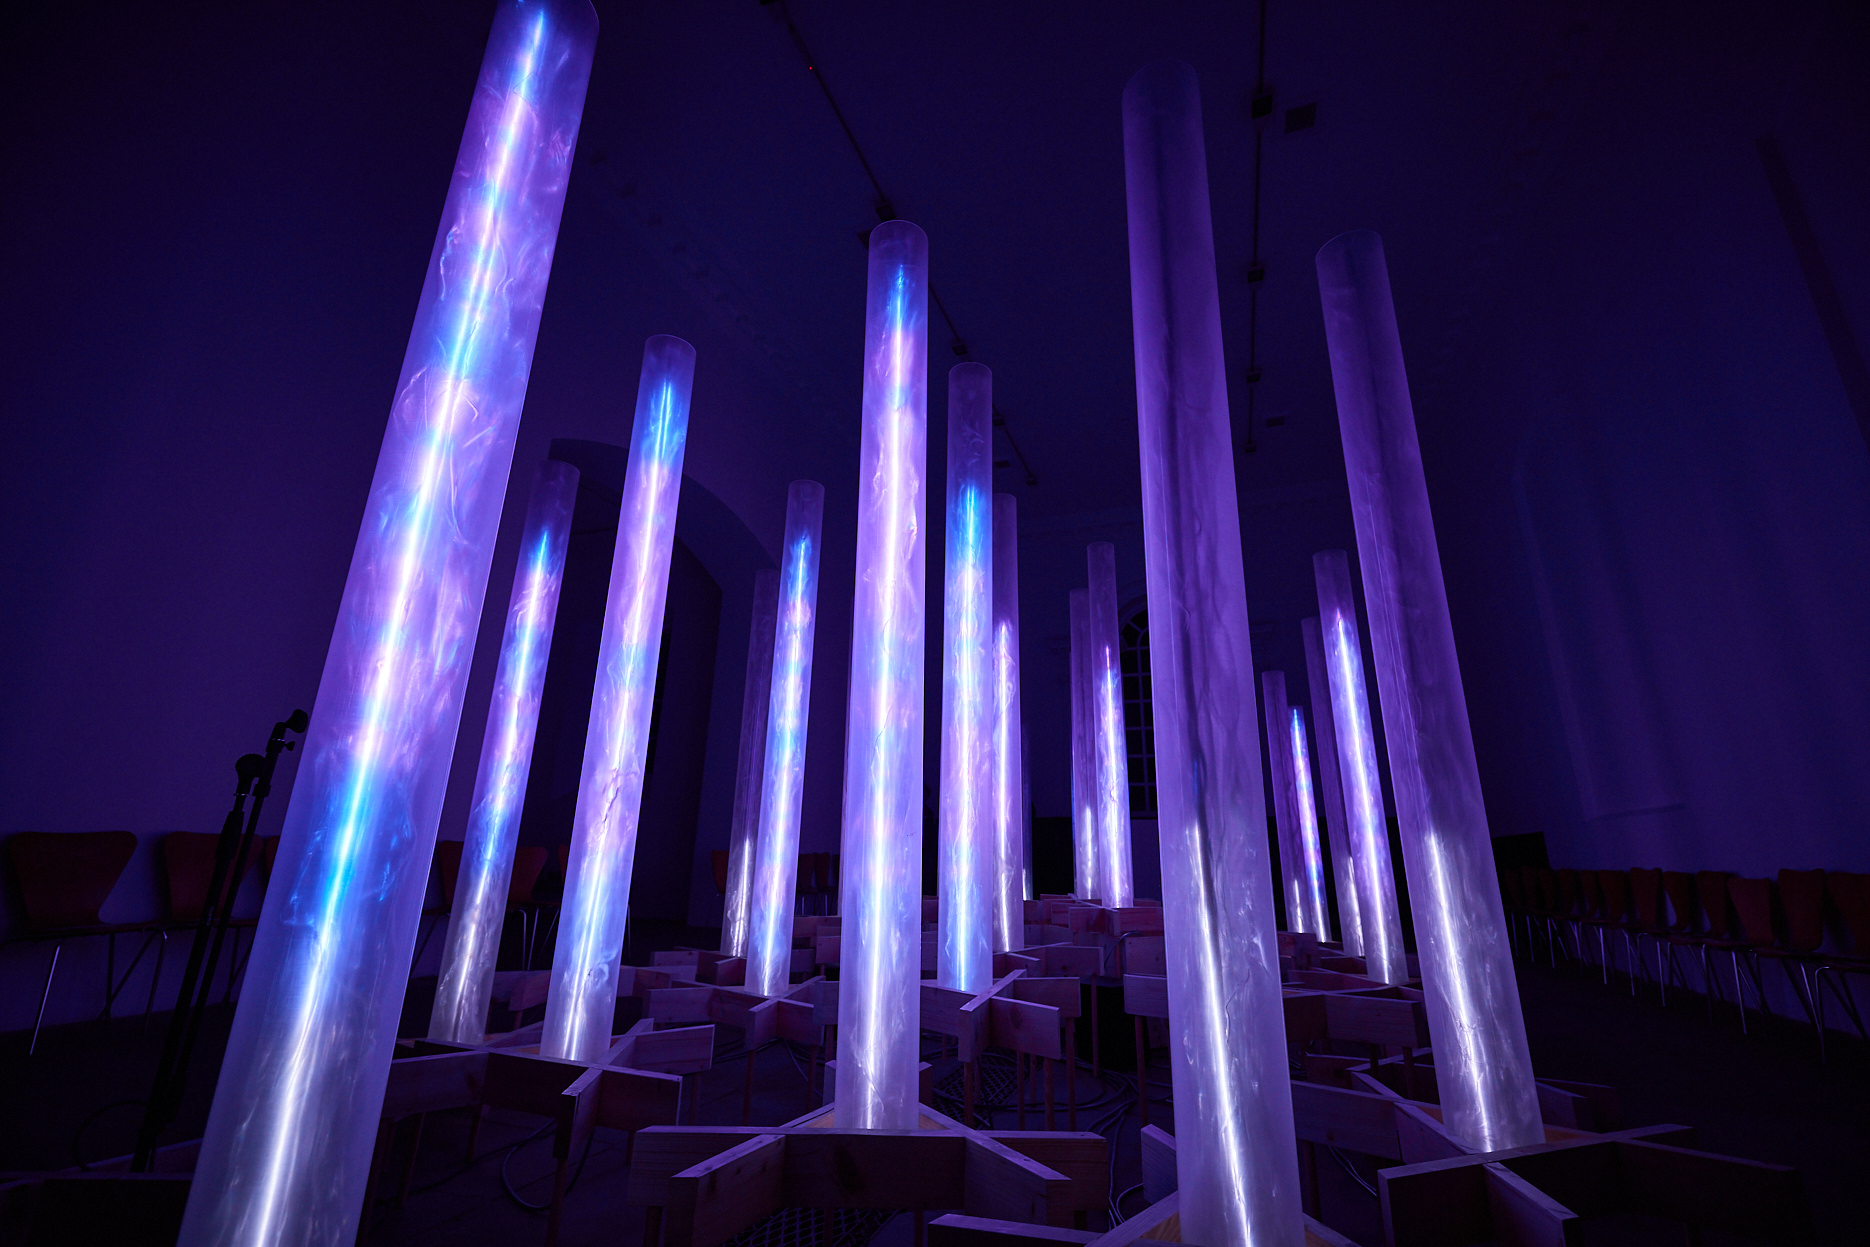 A collection of purple glowing columns